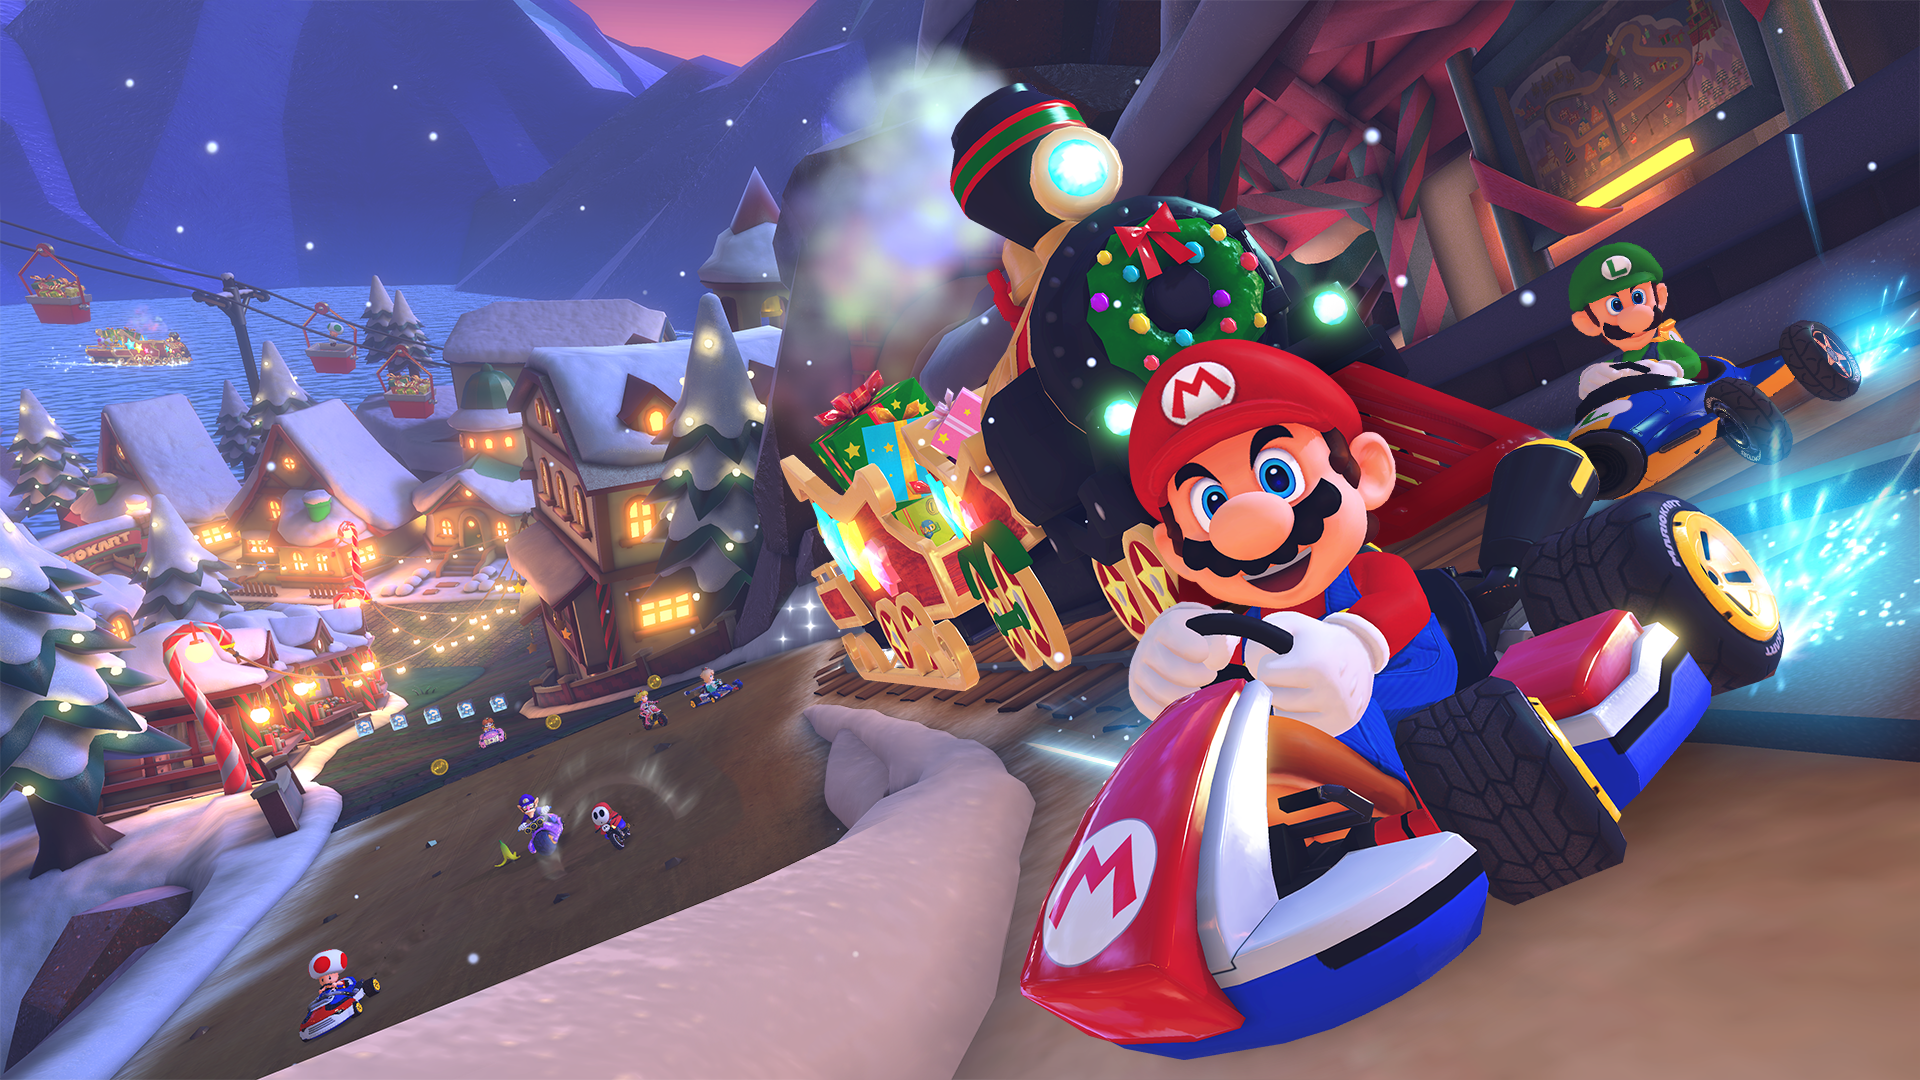 Image for Mario Kart 8 Deluxe Booster Course Pass Wave 3 lands on December 7